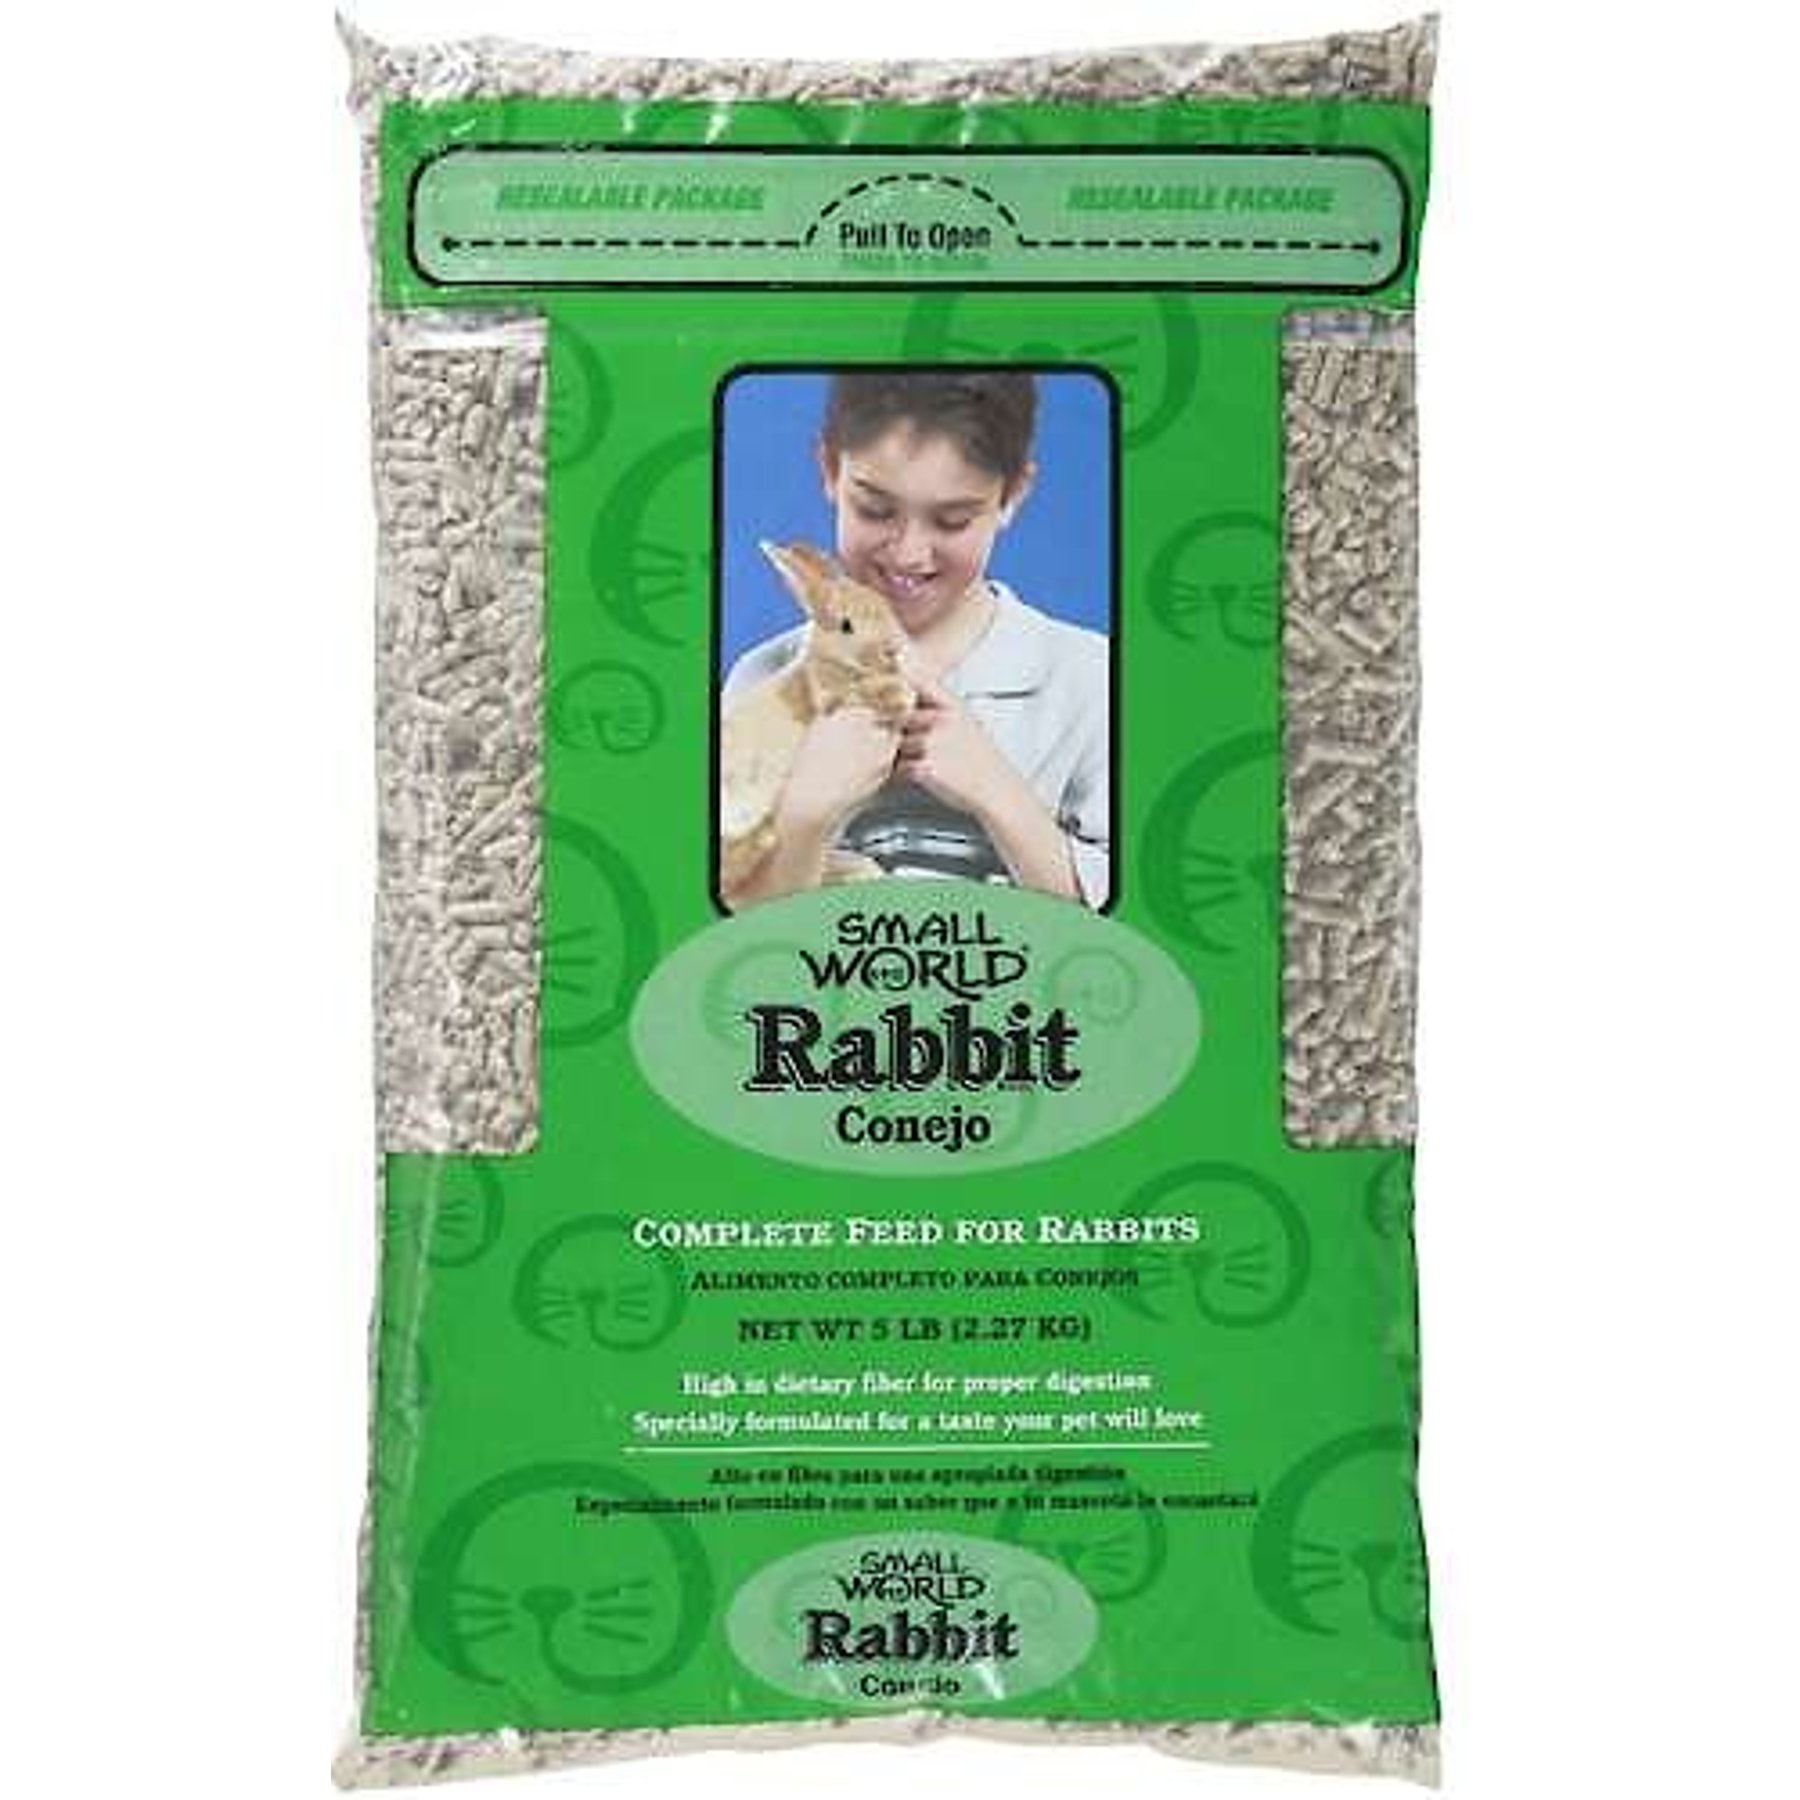 Small World Complete Feed for Rabbits Rabbit 5 lb